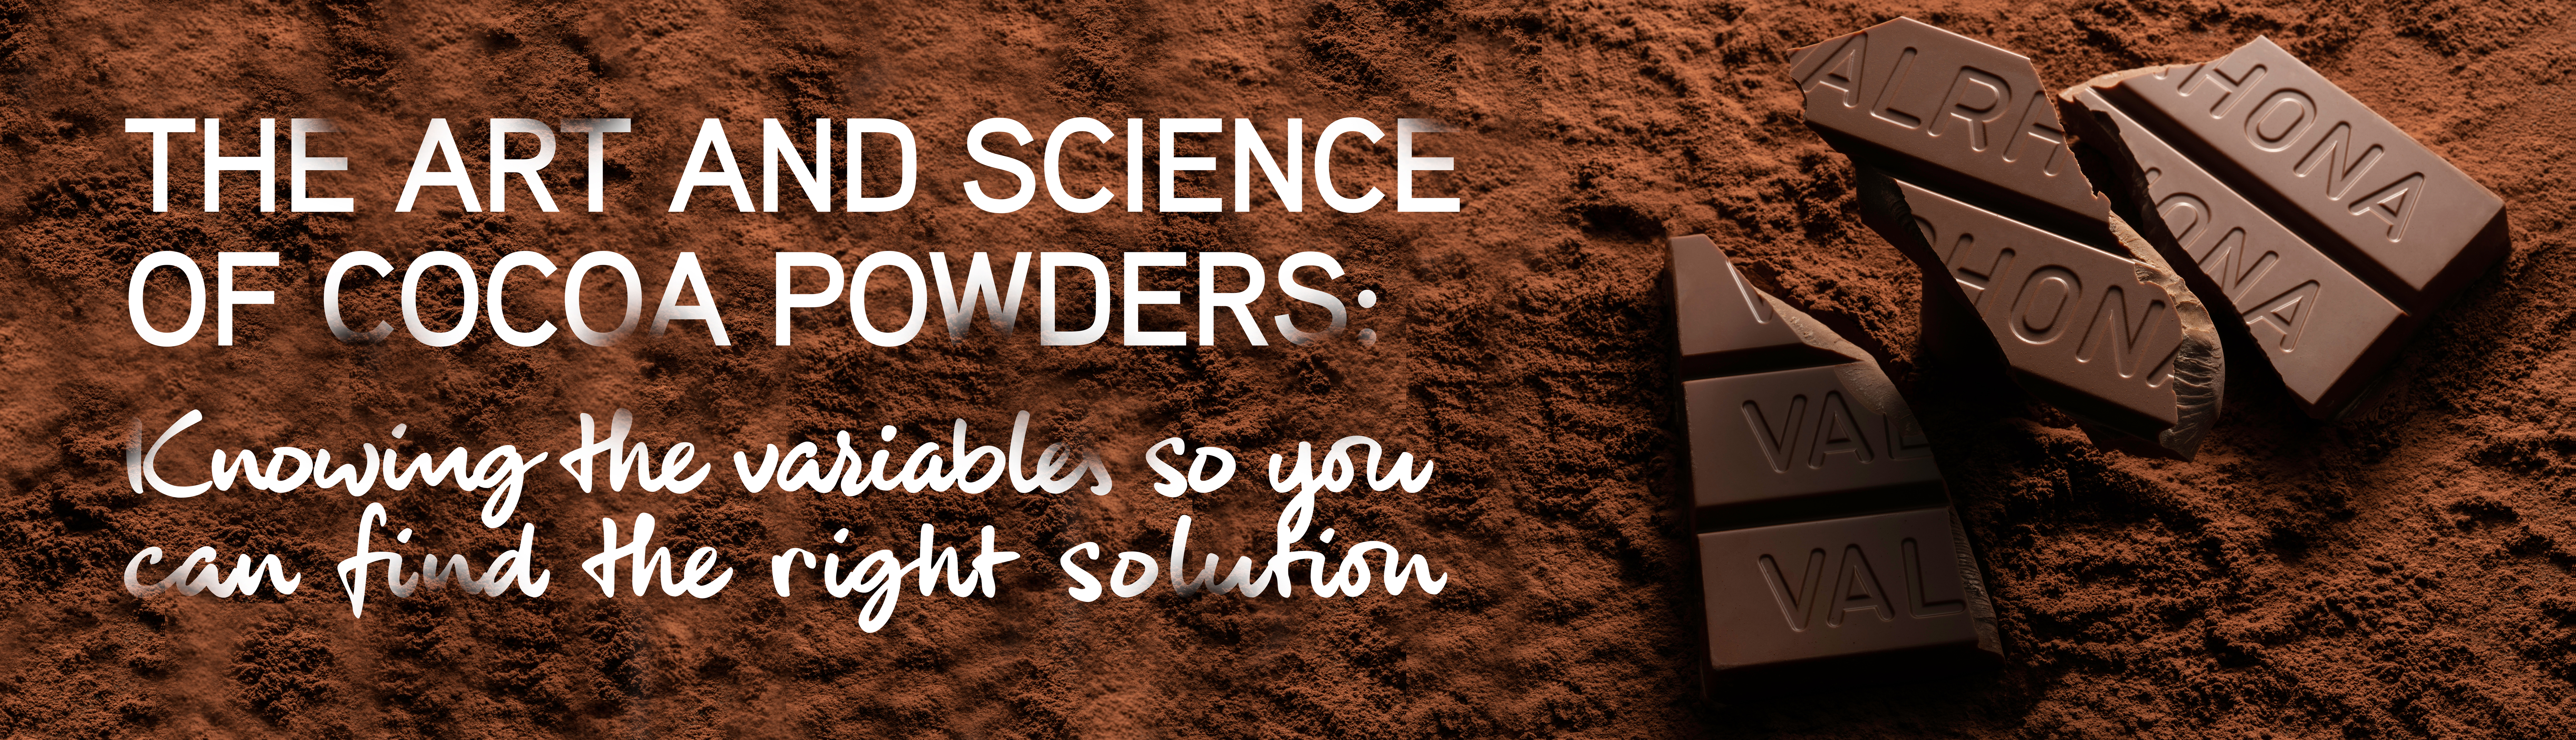 The Art and Science of Cocoa Powders: Knowing the variables so you can find the right solution 